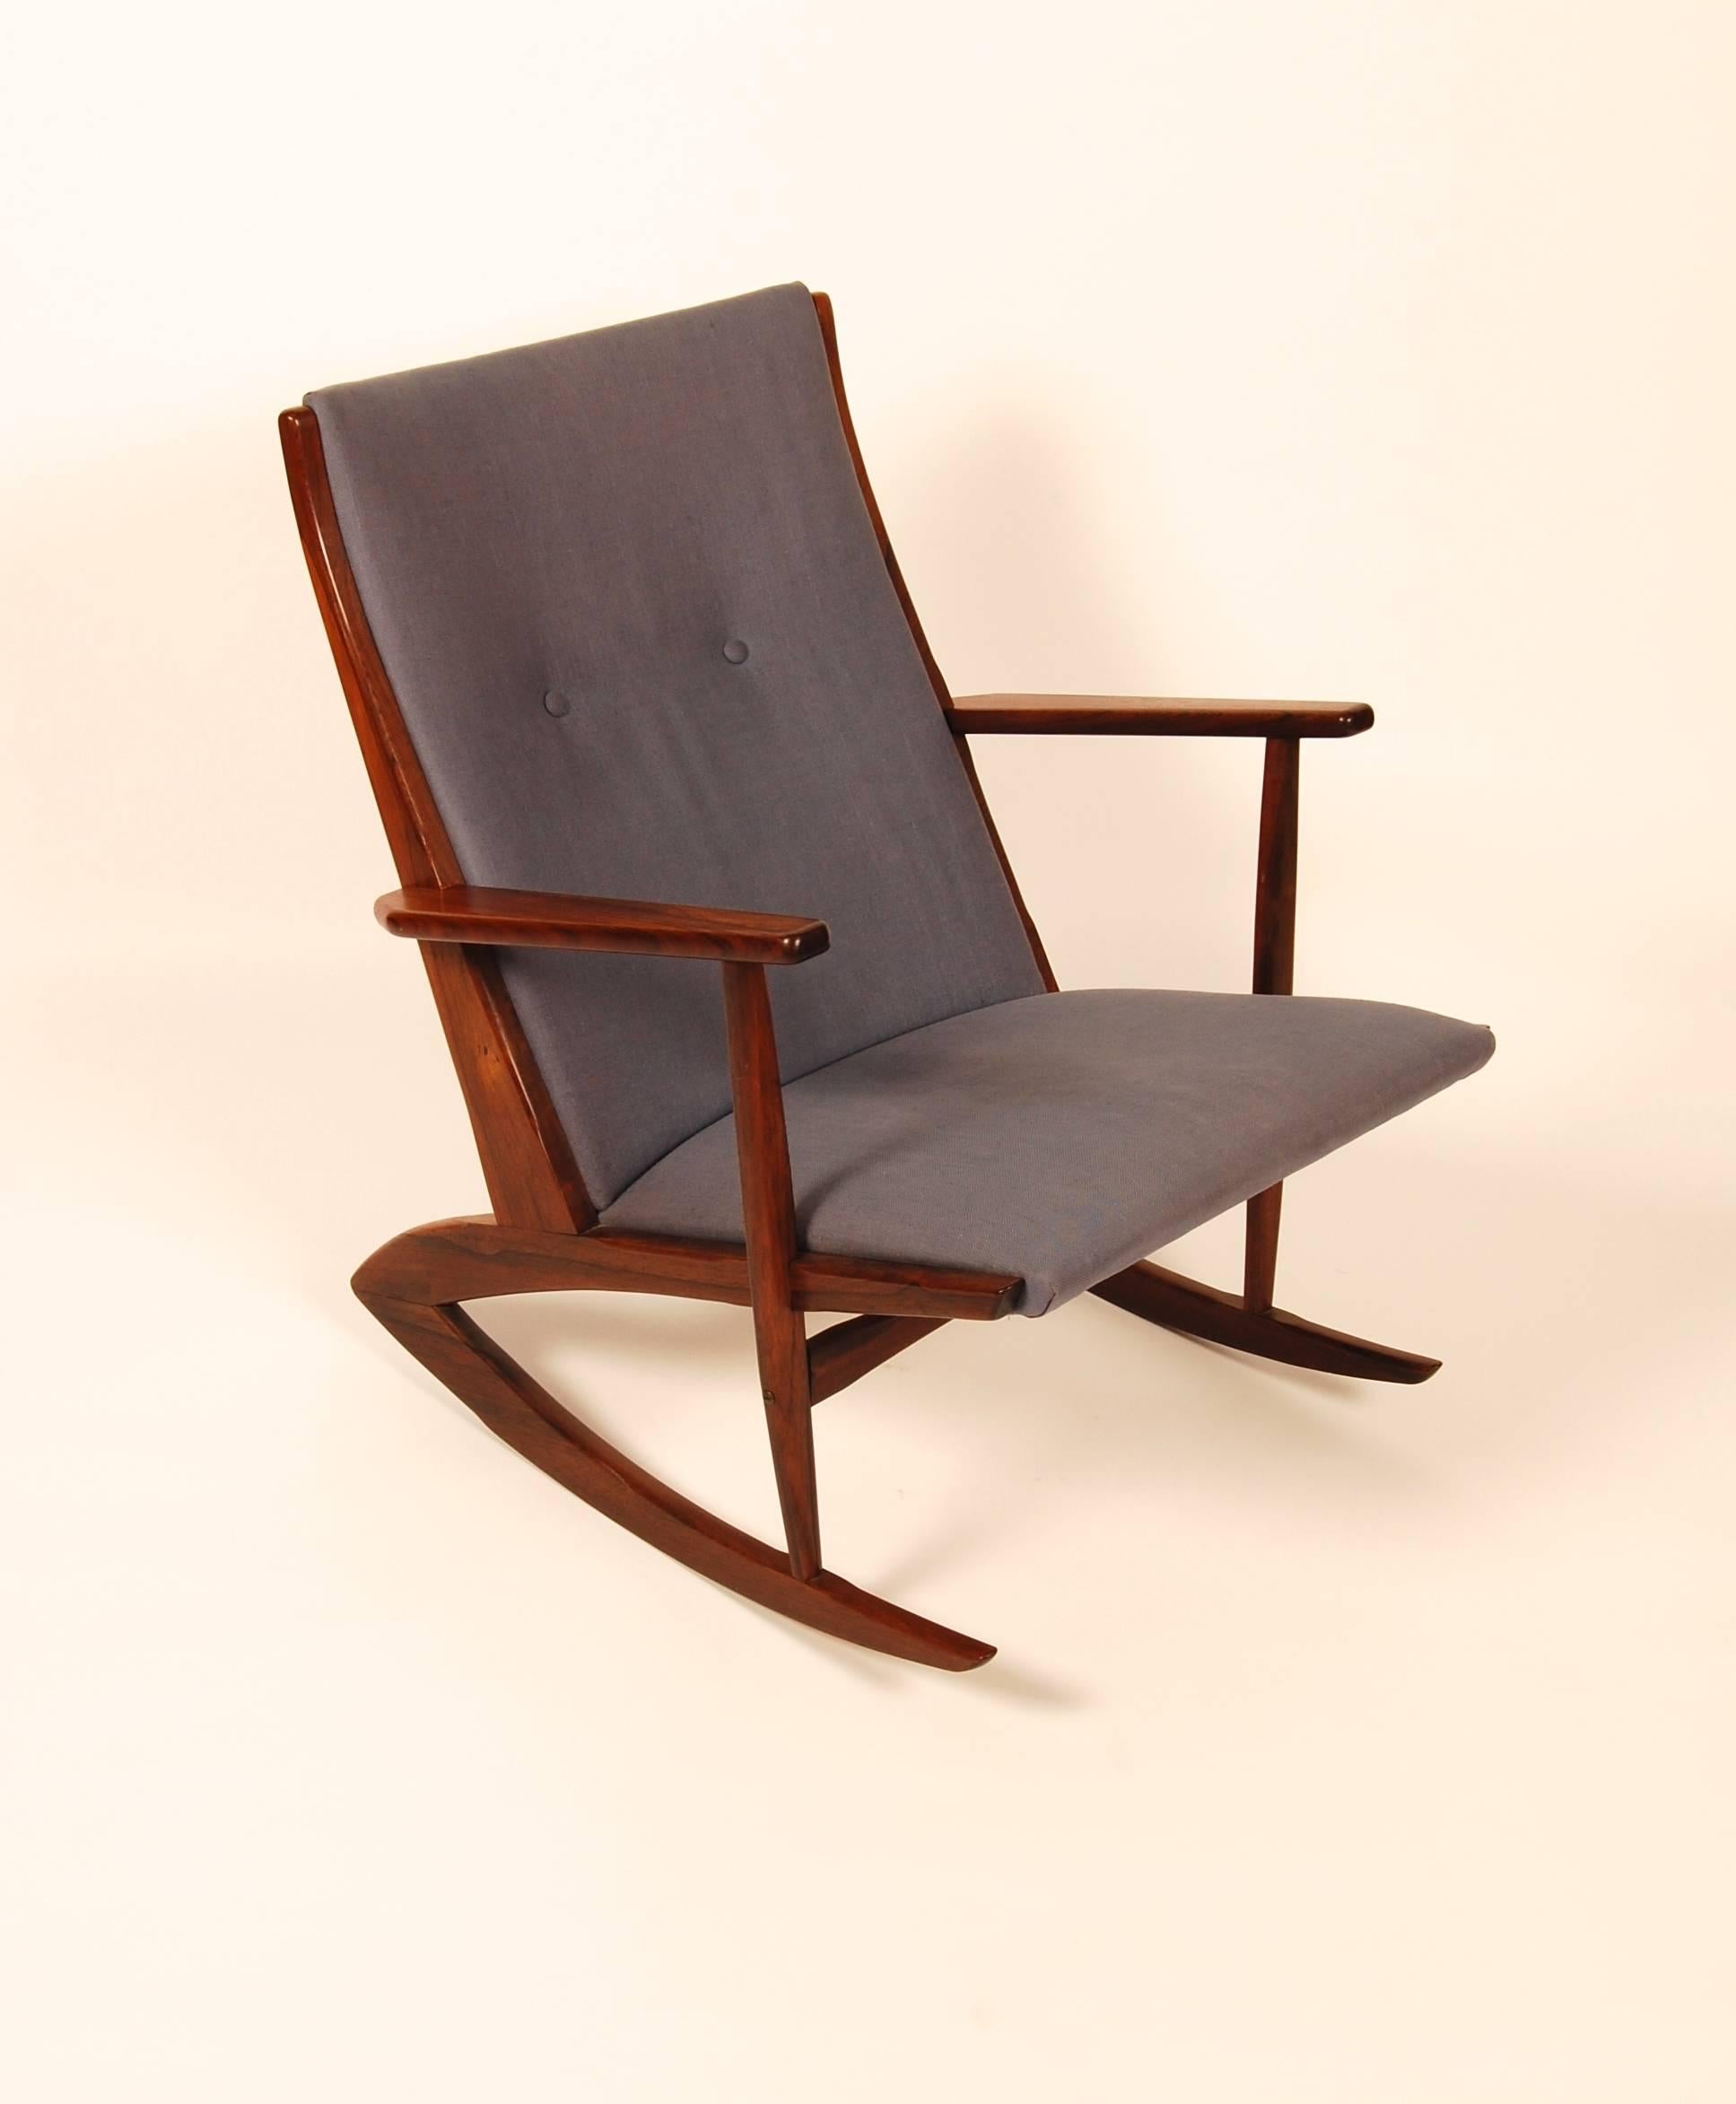 With it's grasshopper like form, Holger George Jensen's 1958 design is a interesting approach to the rocking chair. Another novel design element, in much like a sailboat, this chair has ballast under the front seat to create balance in response to